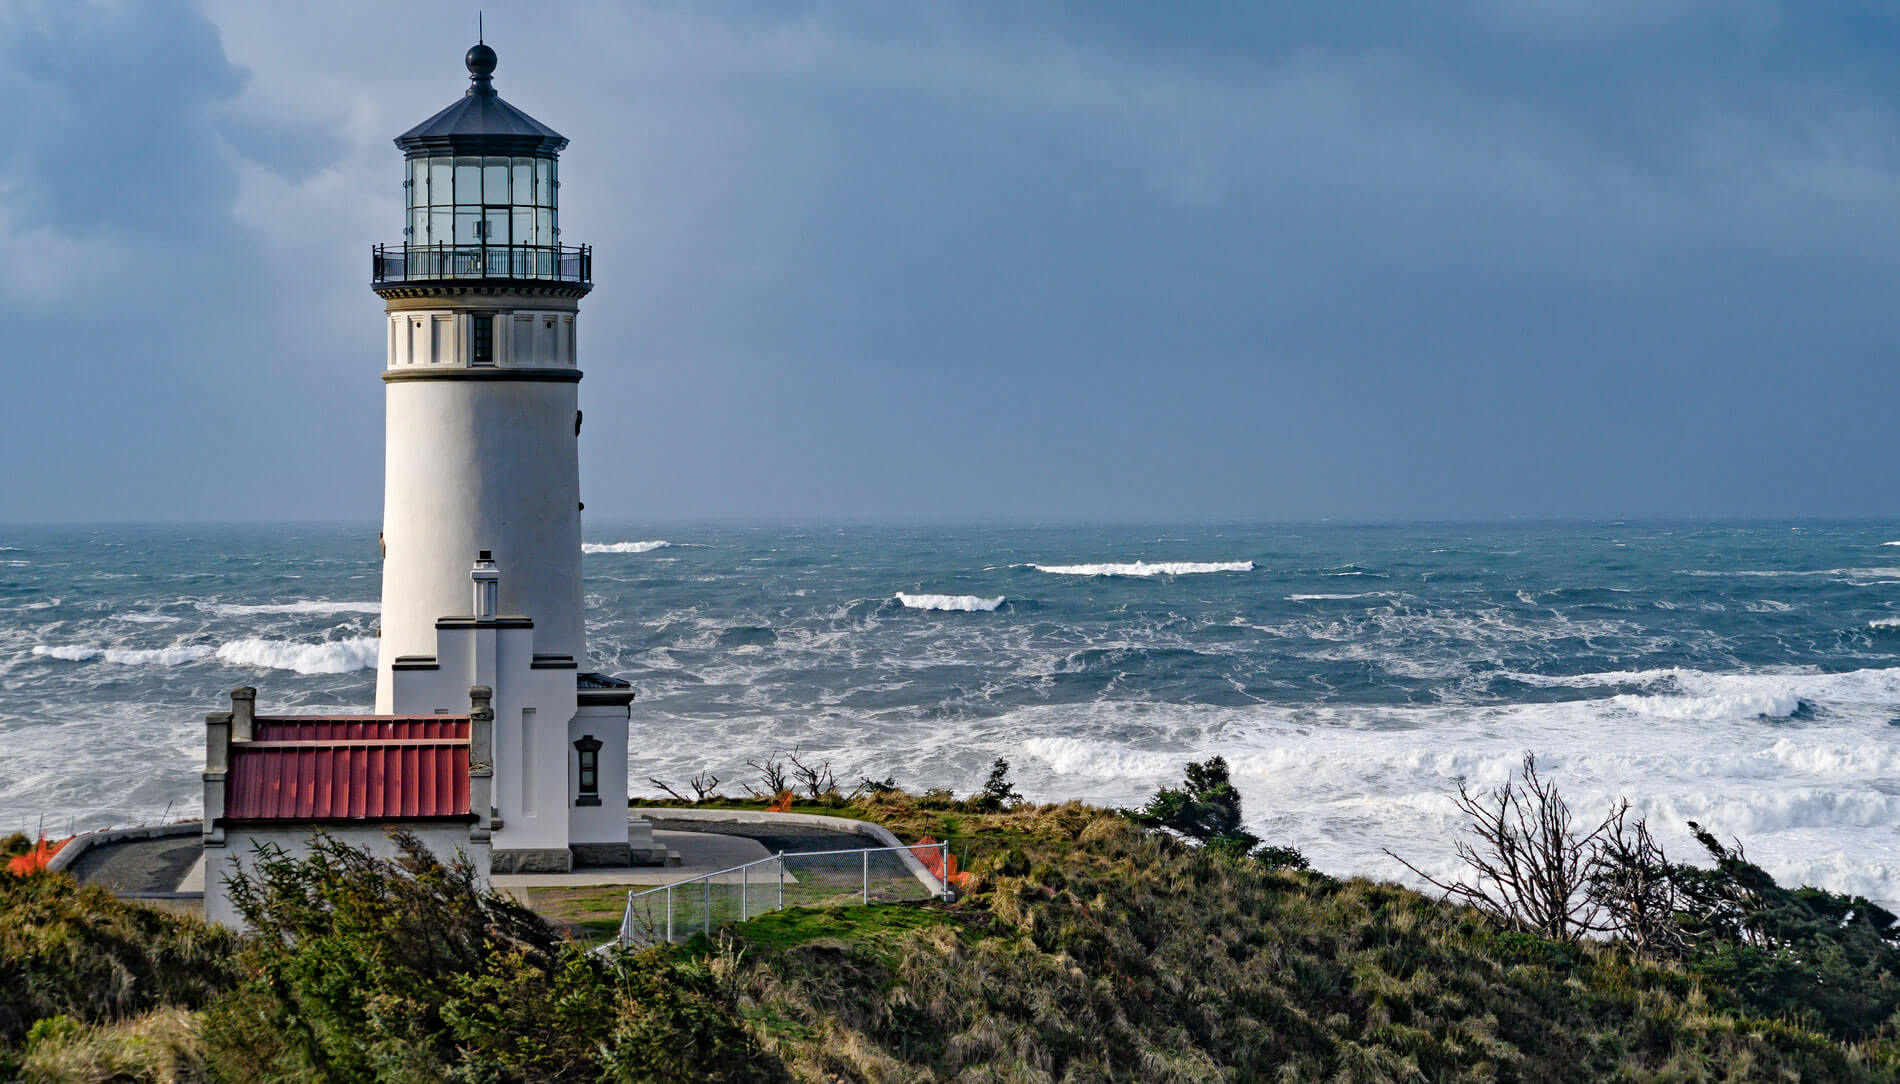 North Head Lighthouse at Cape Disappointment State Park Credit WestWindGraphics GettyImages